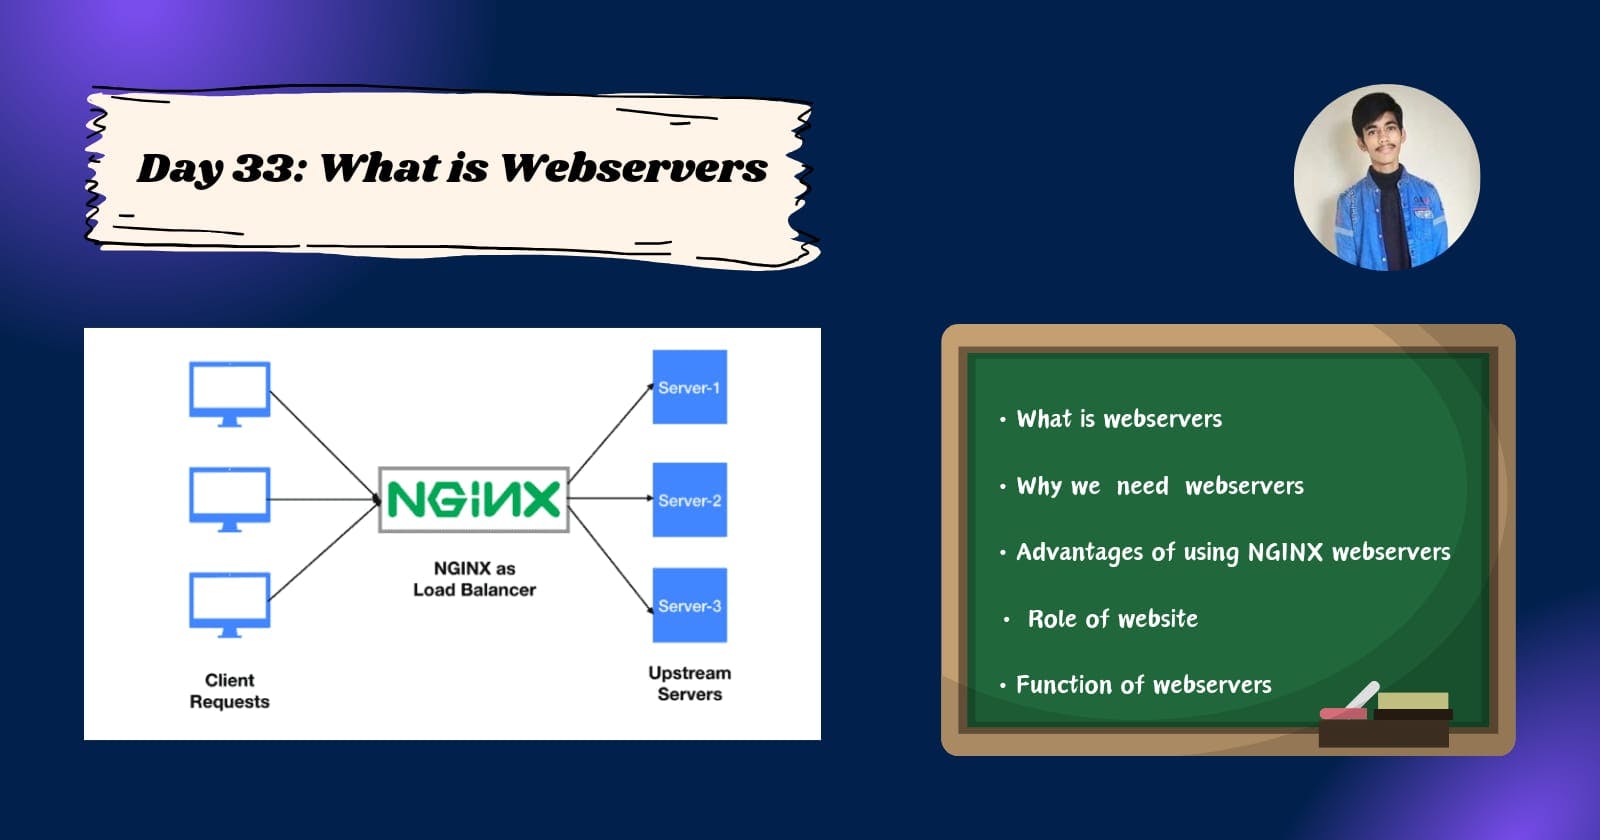 Day 33: What is Webserver (NGINX)